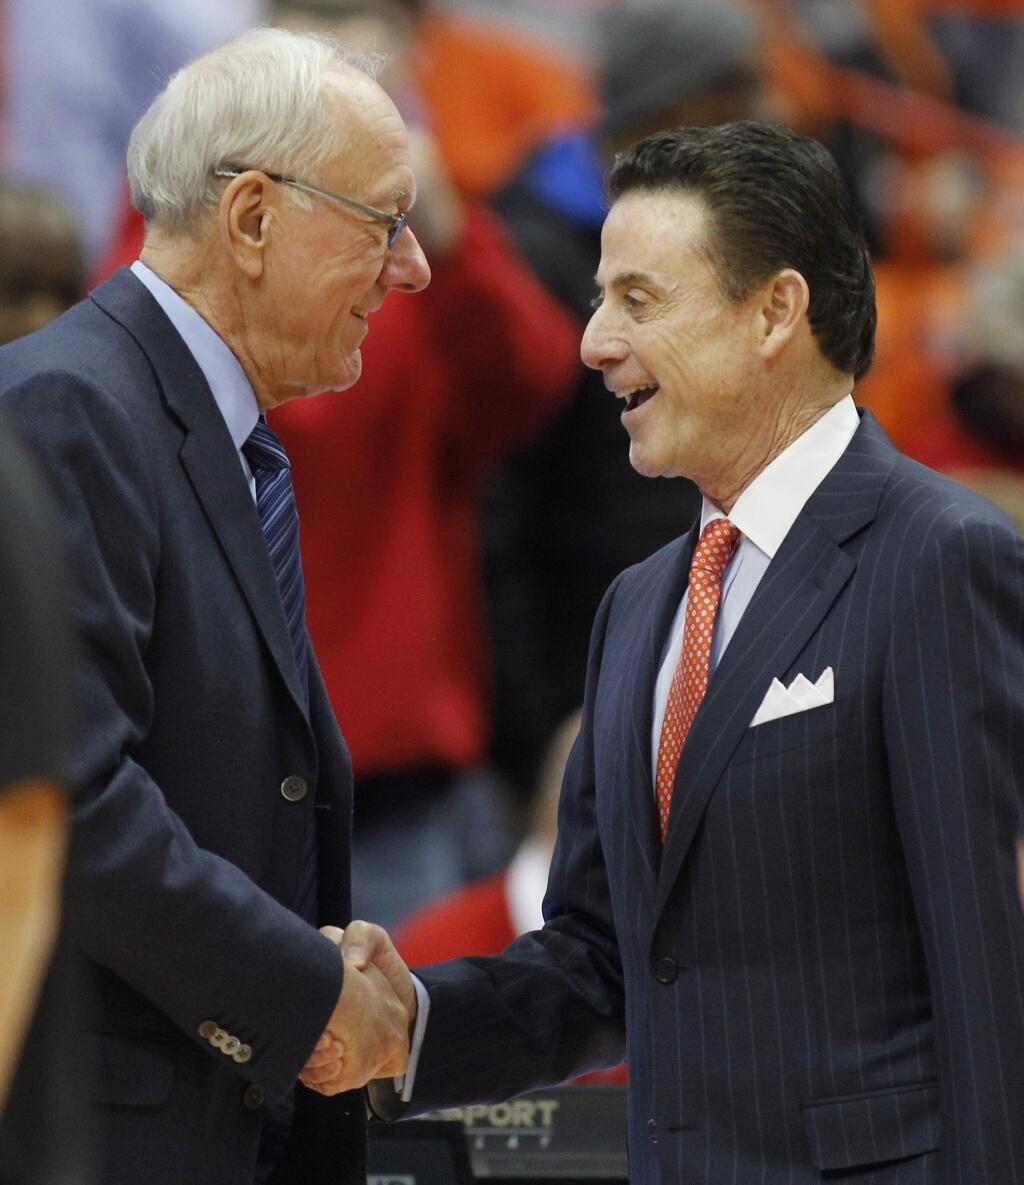 Syracuse head coach Jim Boeheim, left, and Louisville head coach Rick Pitino, right, shake hands before a game in Syracuse, N.Y., Monday, Feb. 13, 2017. (AP Photo/Nick Lisi)